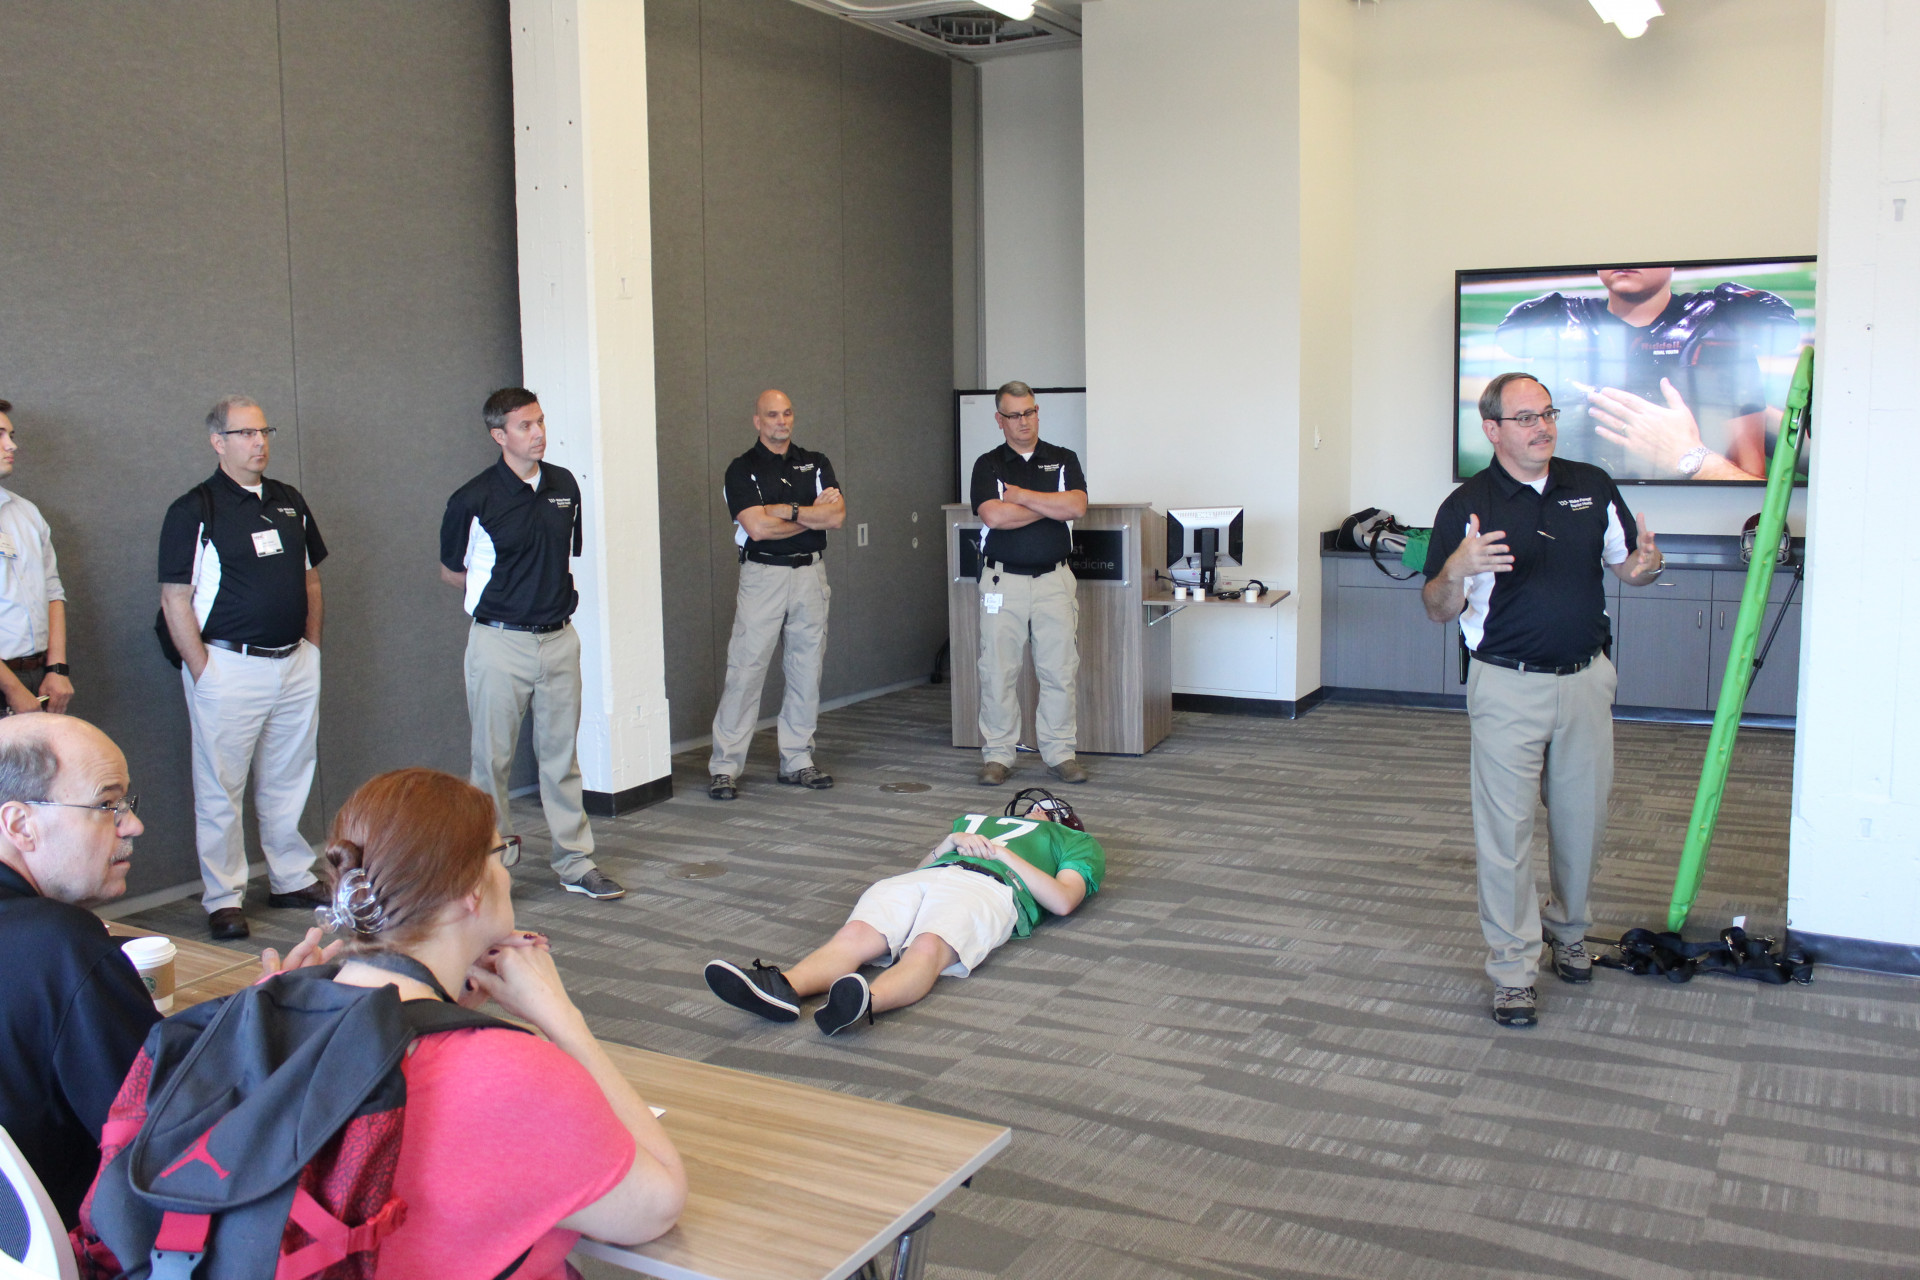 Jeff Hinshaw explains the procedures and precautions of emergency spinal injuries at the Sports Medicine Summit on June 24, 2018, at Wake Forest University School of Medicine (Daniel Coston Photo)